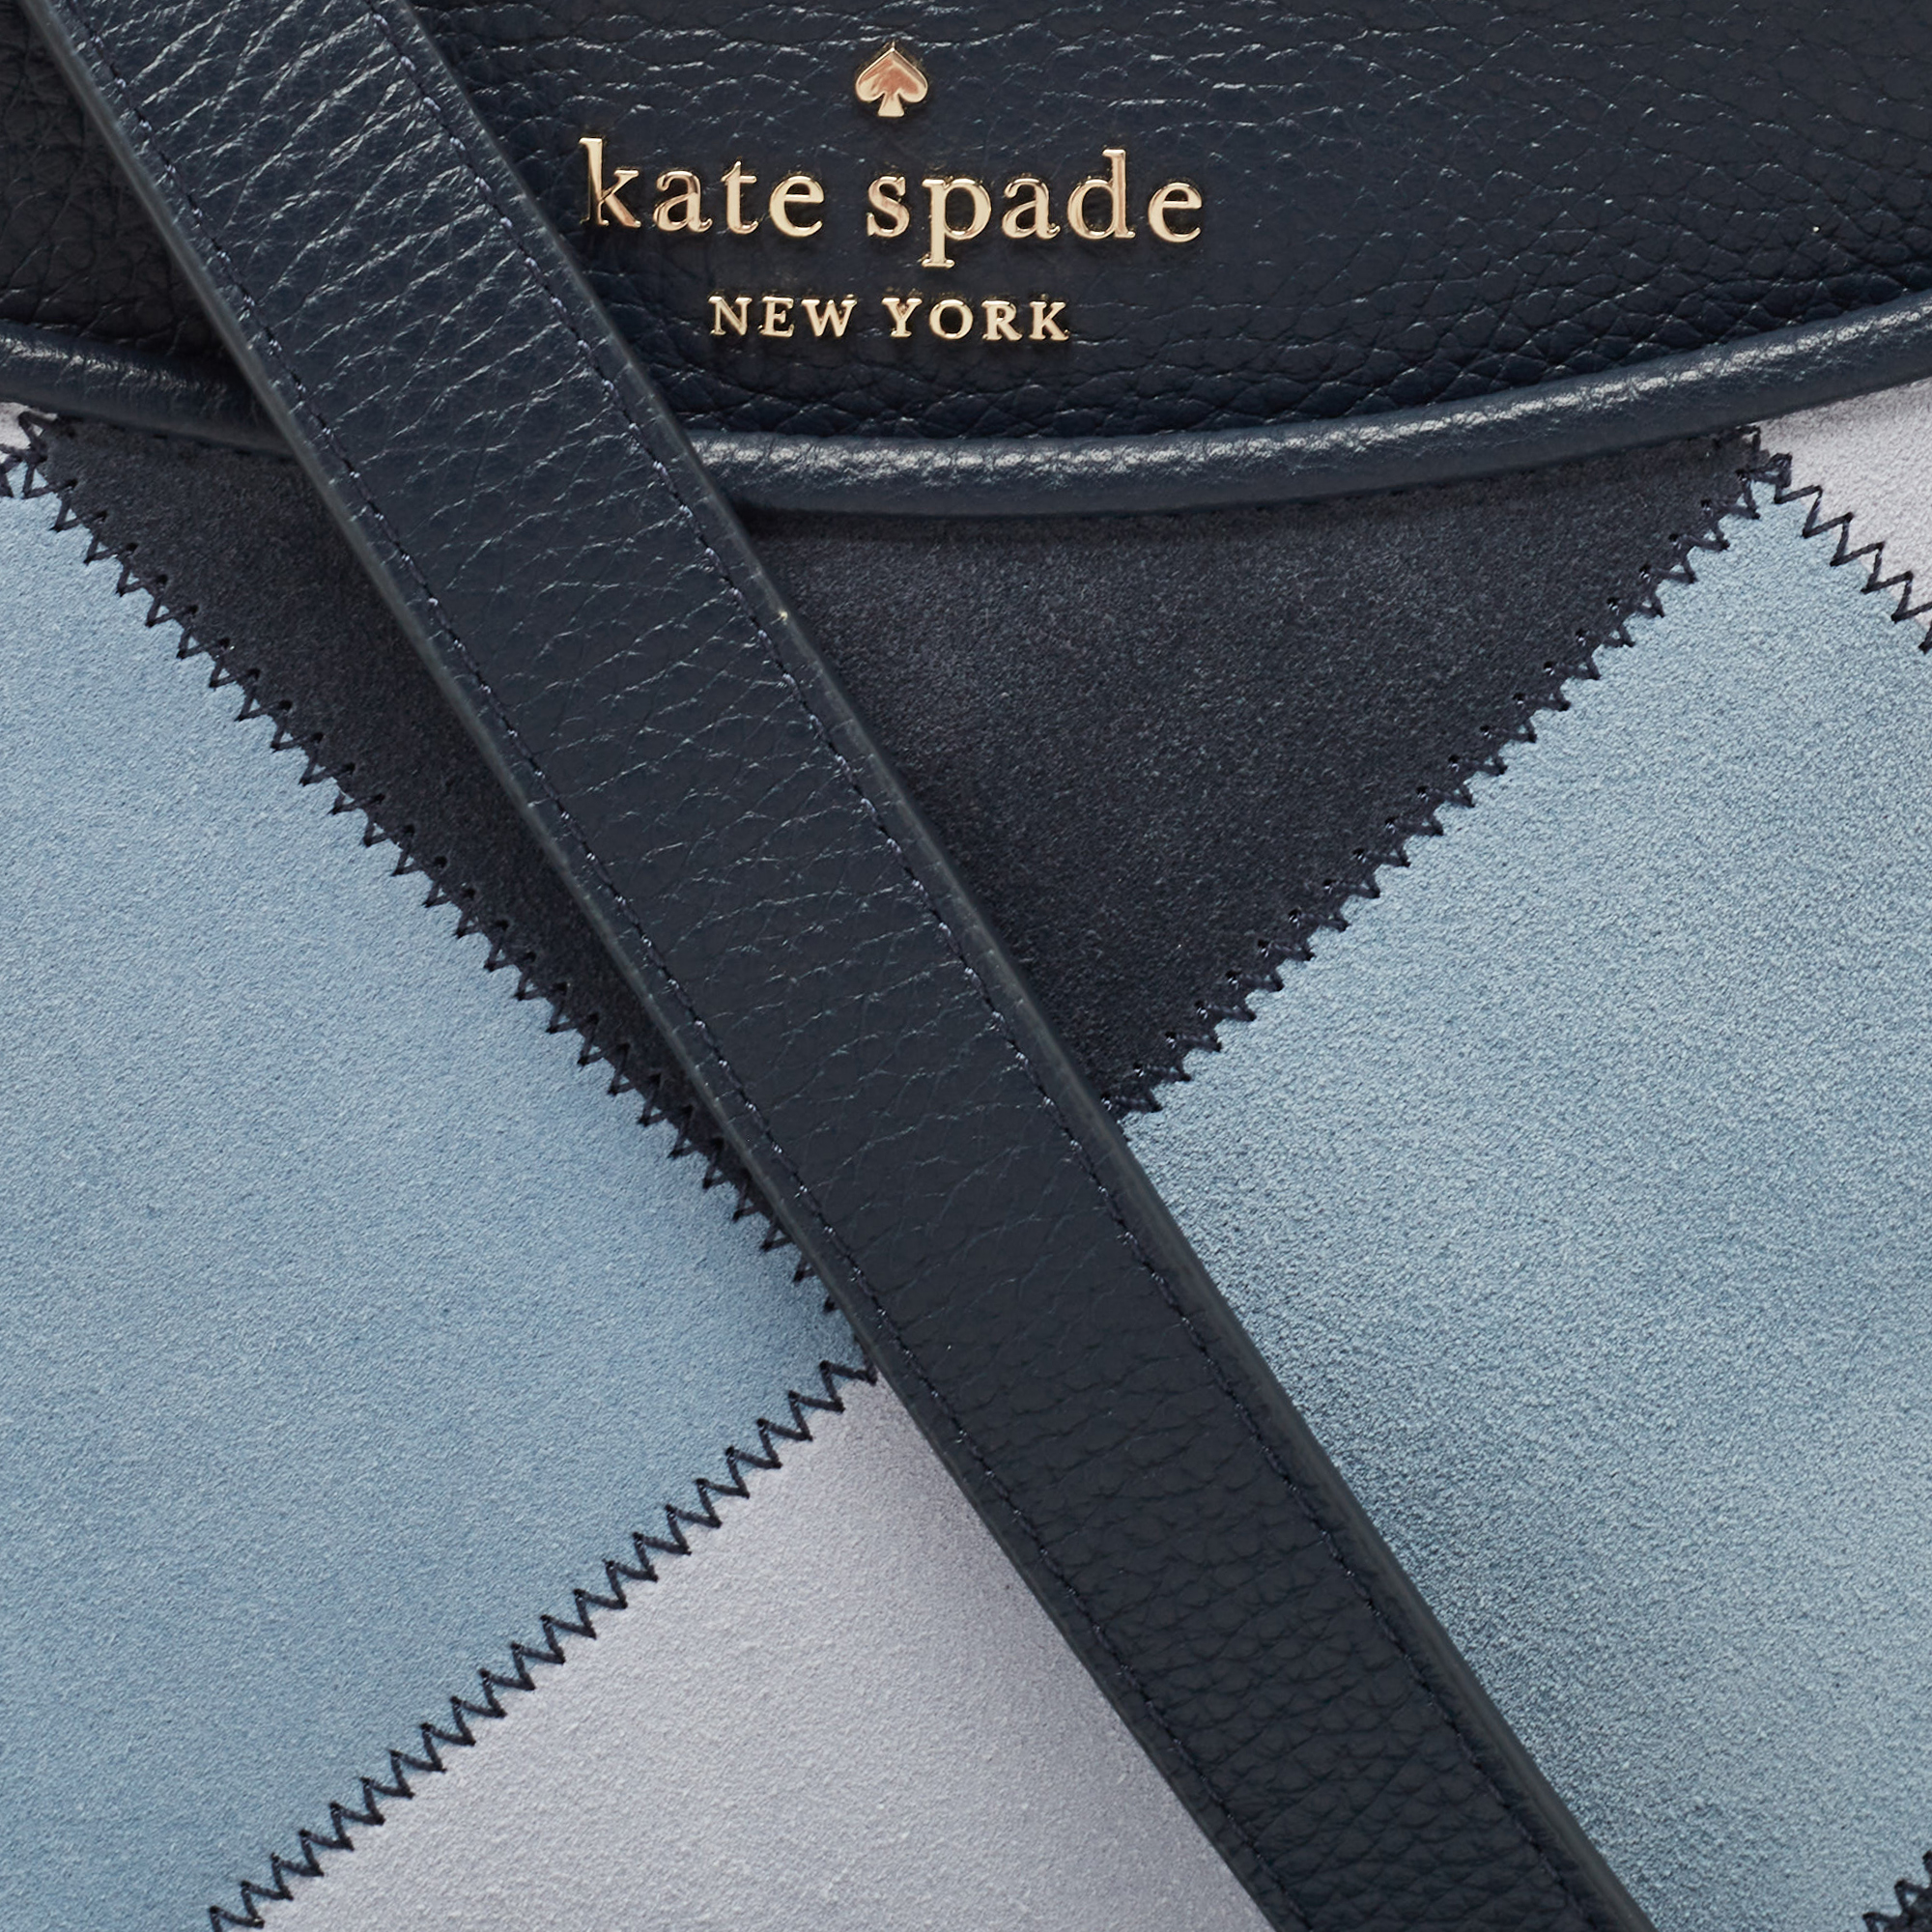 Kate Spade Tri Tone Blue Quilted Leather And Suede North South Leila Crossbody Bag